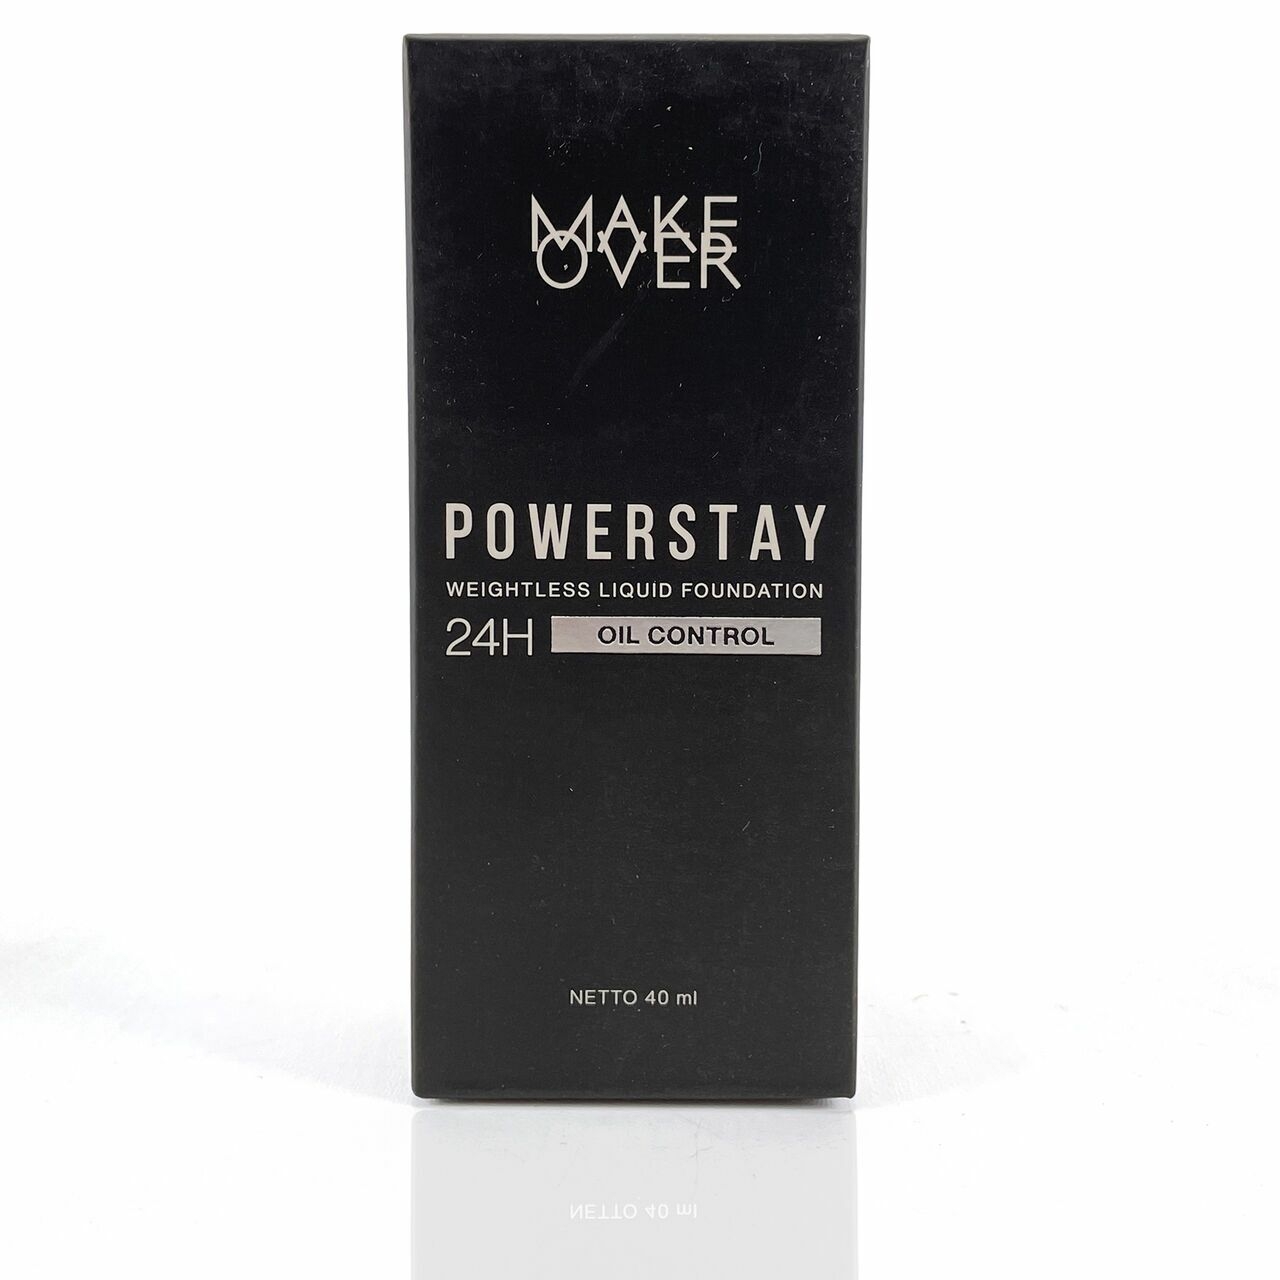 Make Over Powerstay Weightless Liquid Foundation 24H Oil Control